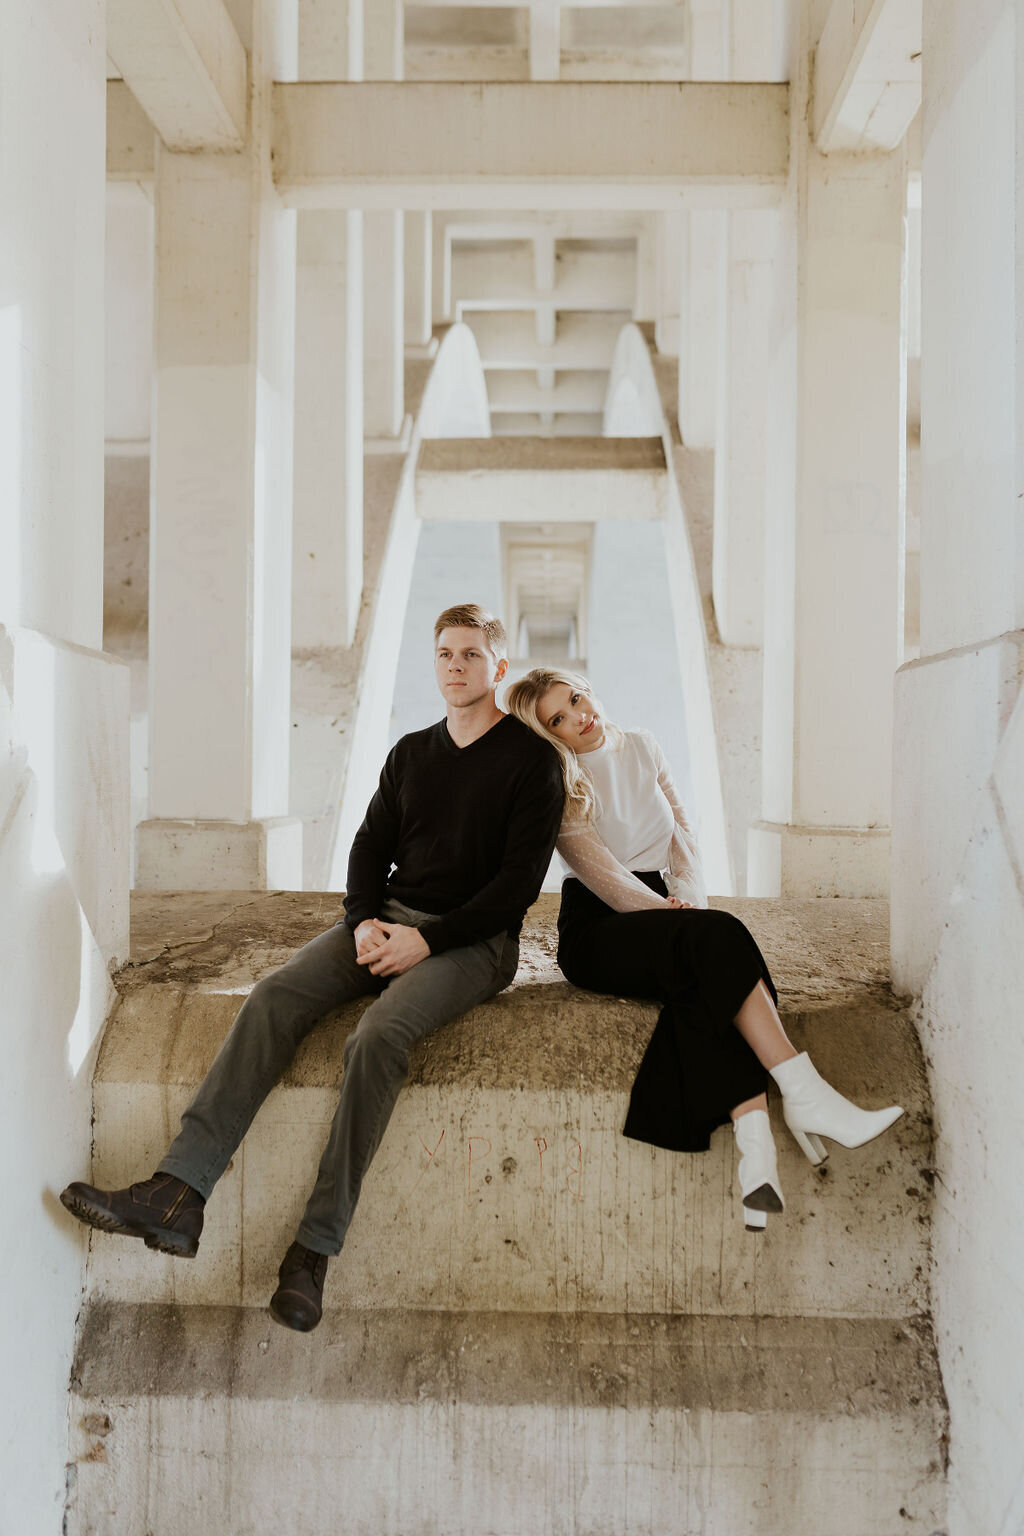 Woman wearing a black skirt and white boots leans on man with a black sweater while they sit on a ledge under a white bridge